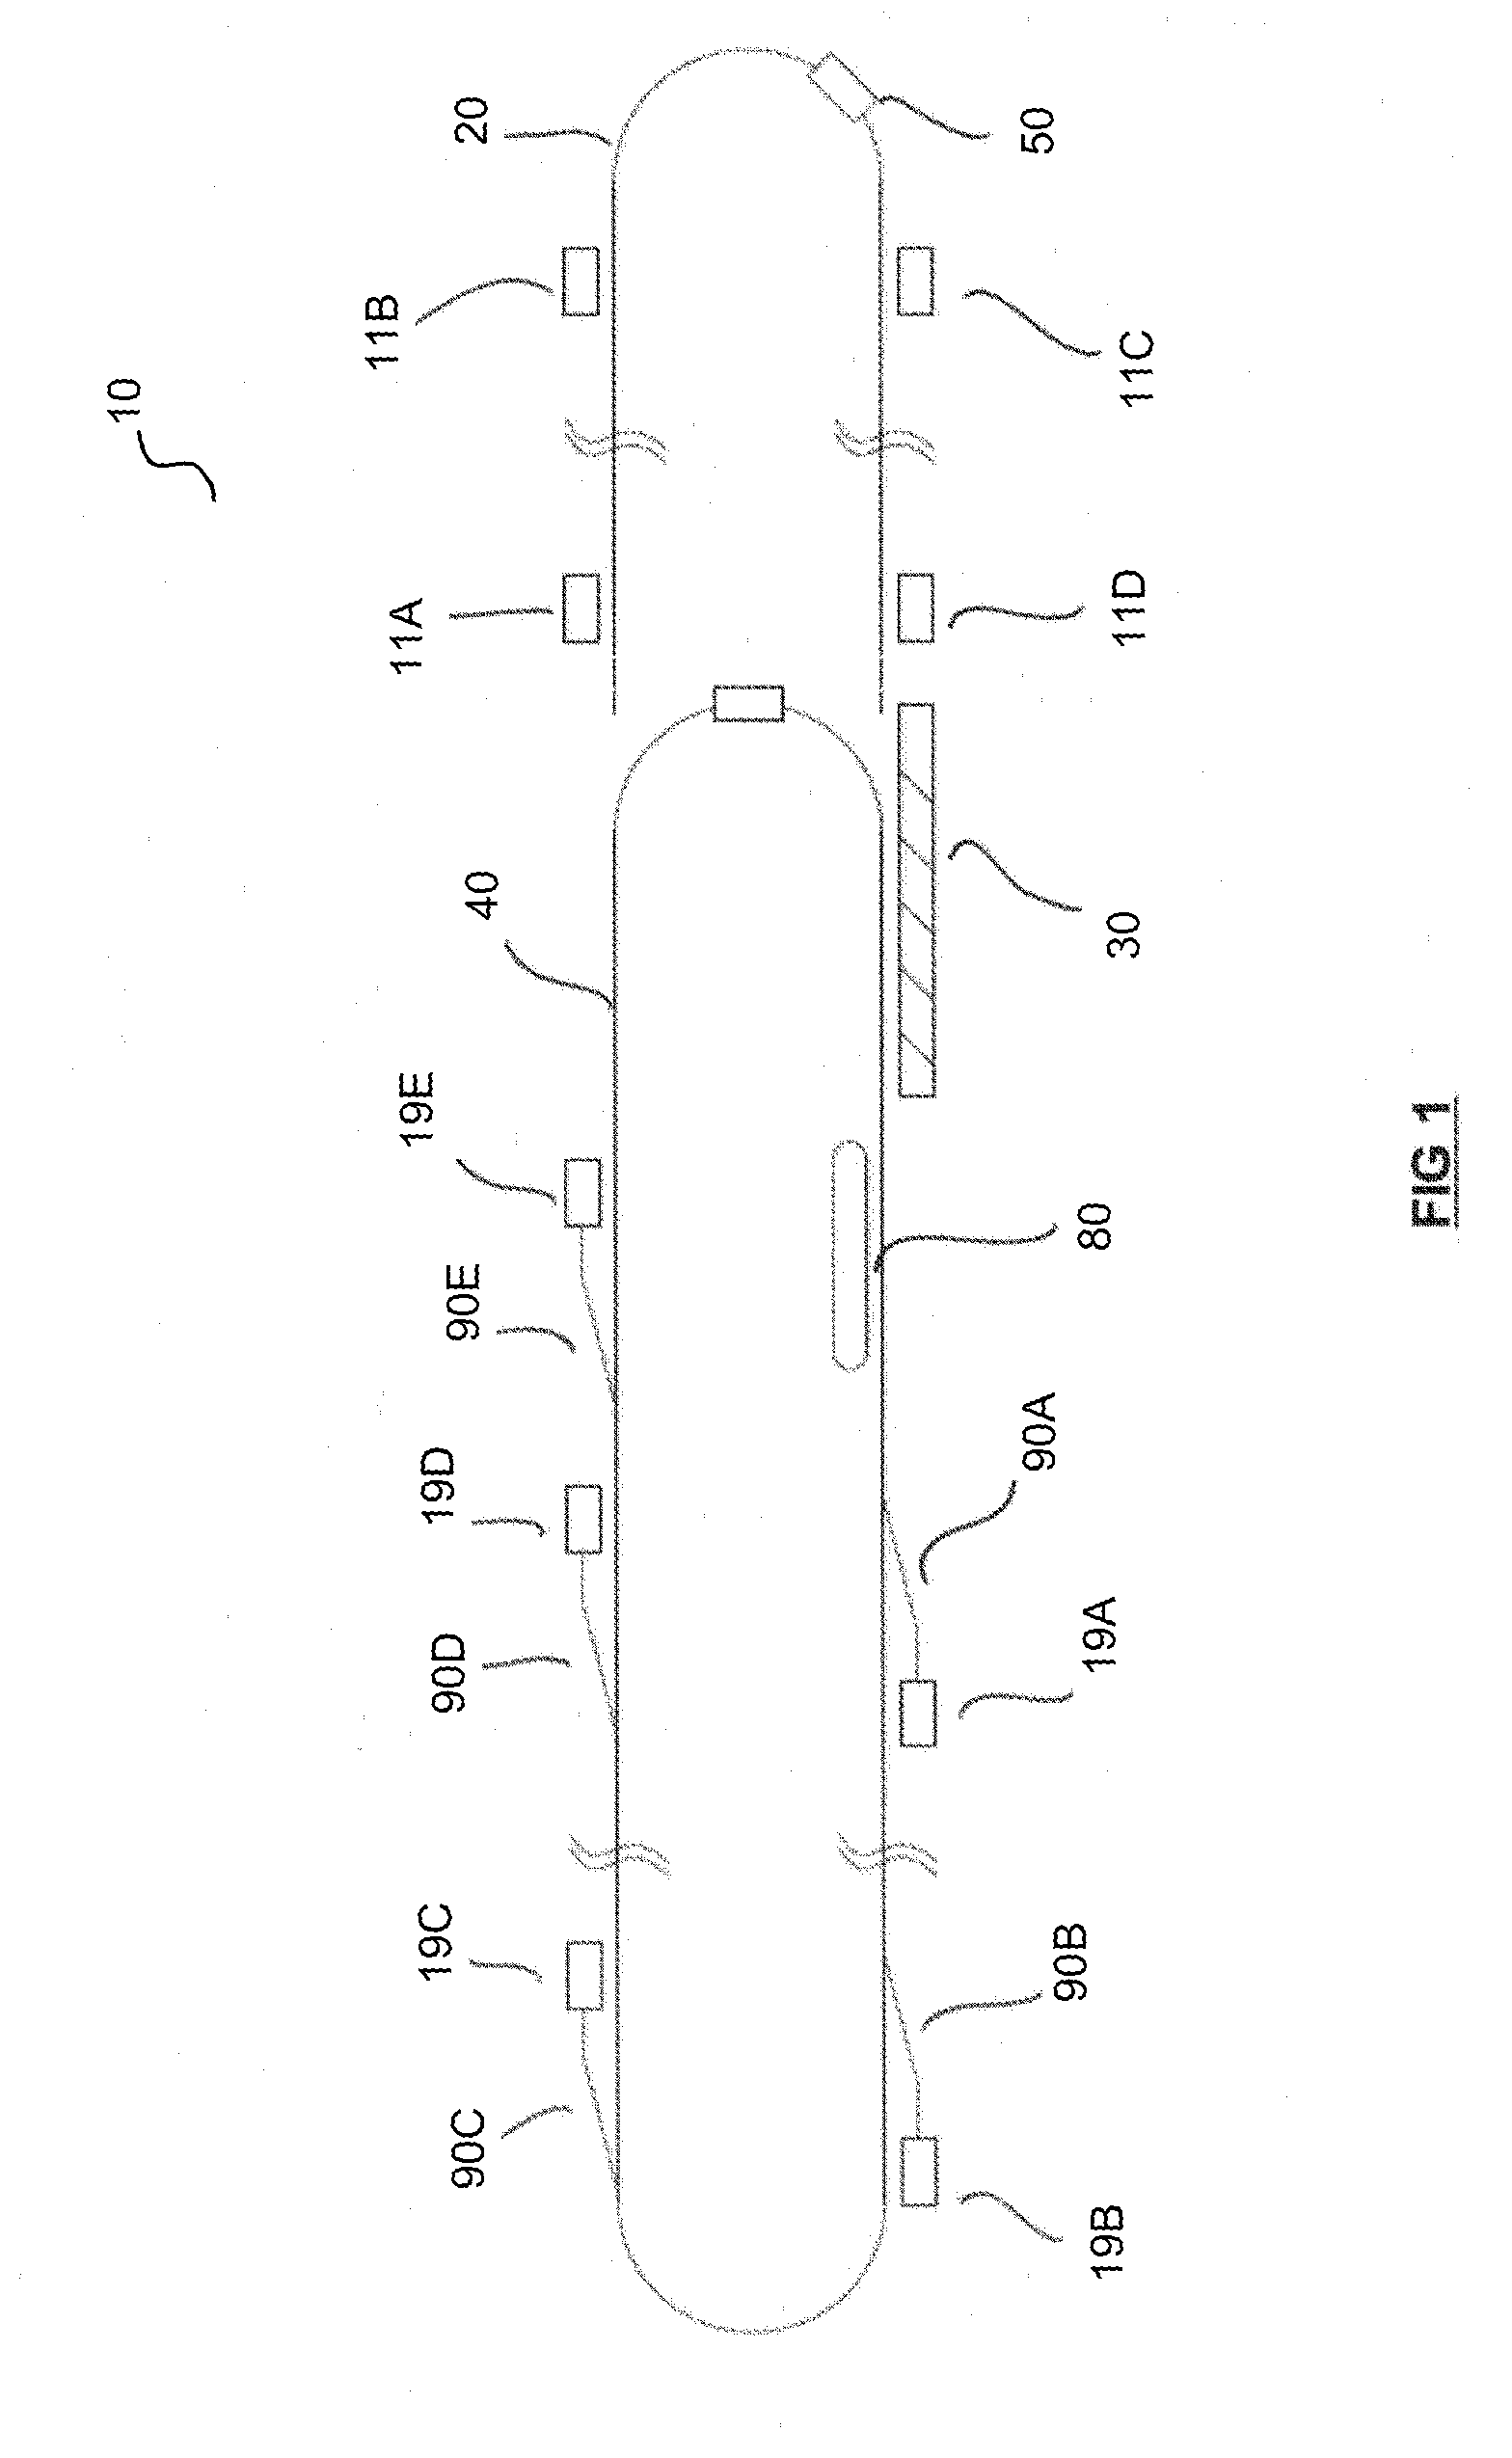 Methods, apparatuses, and systems for conveying and sorting produce